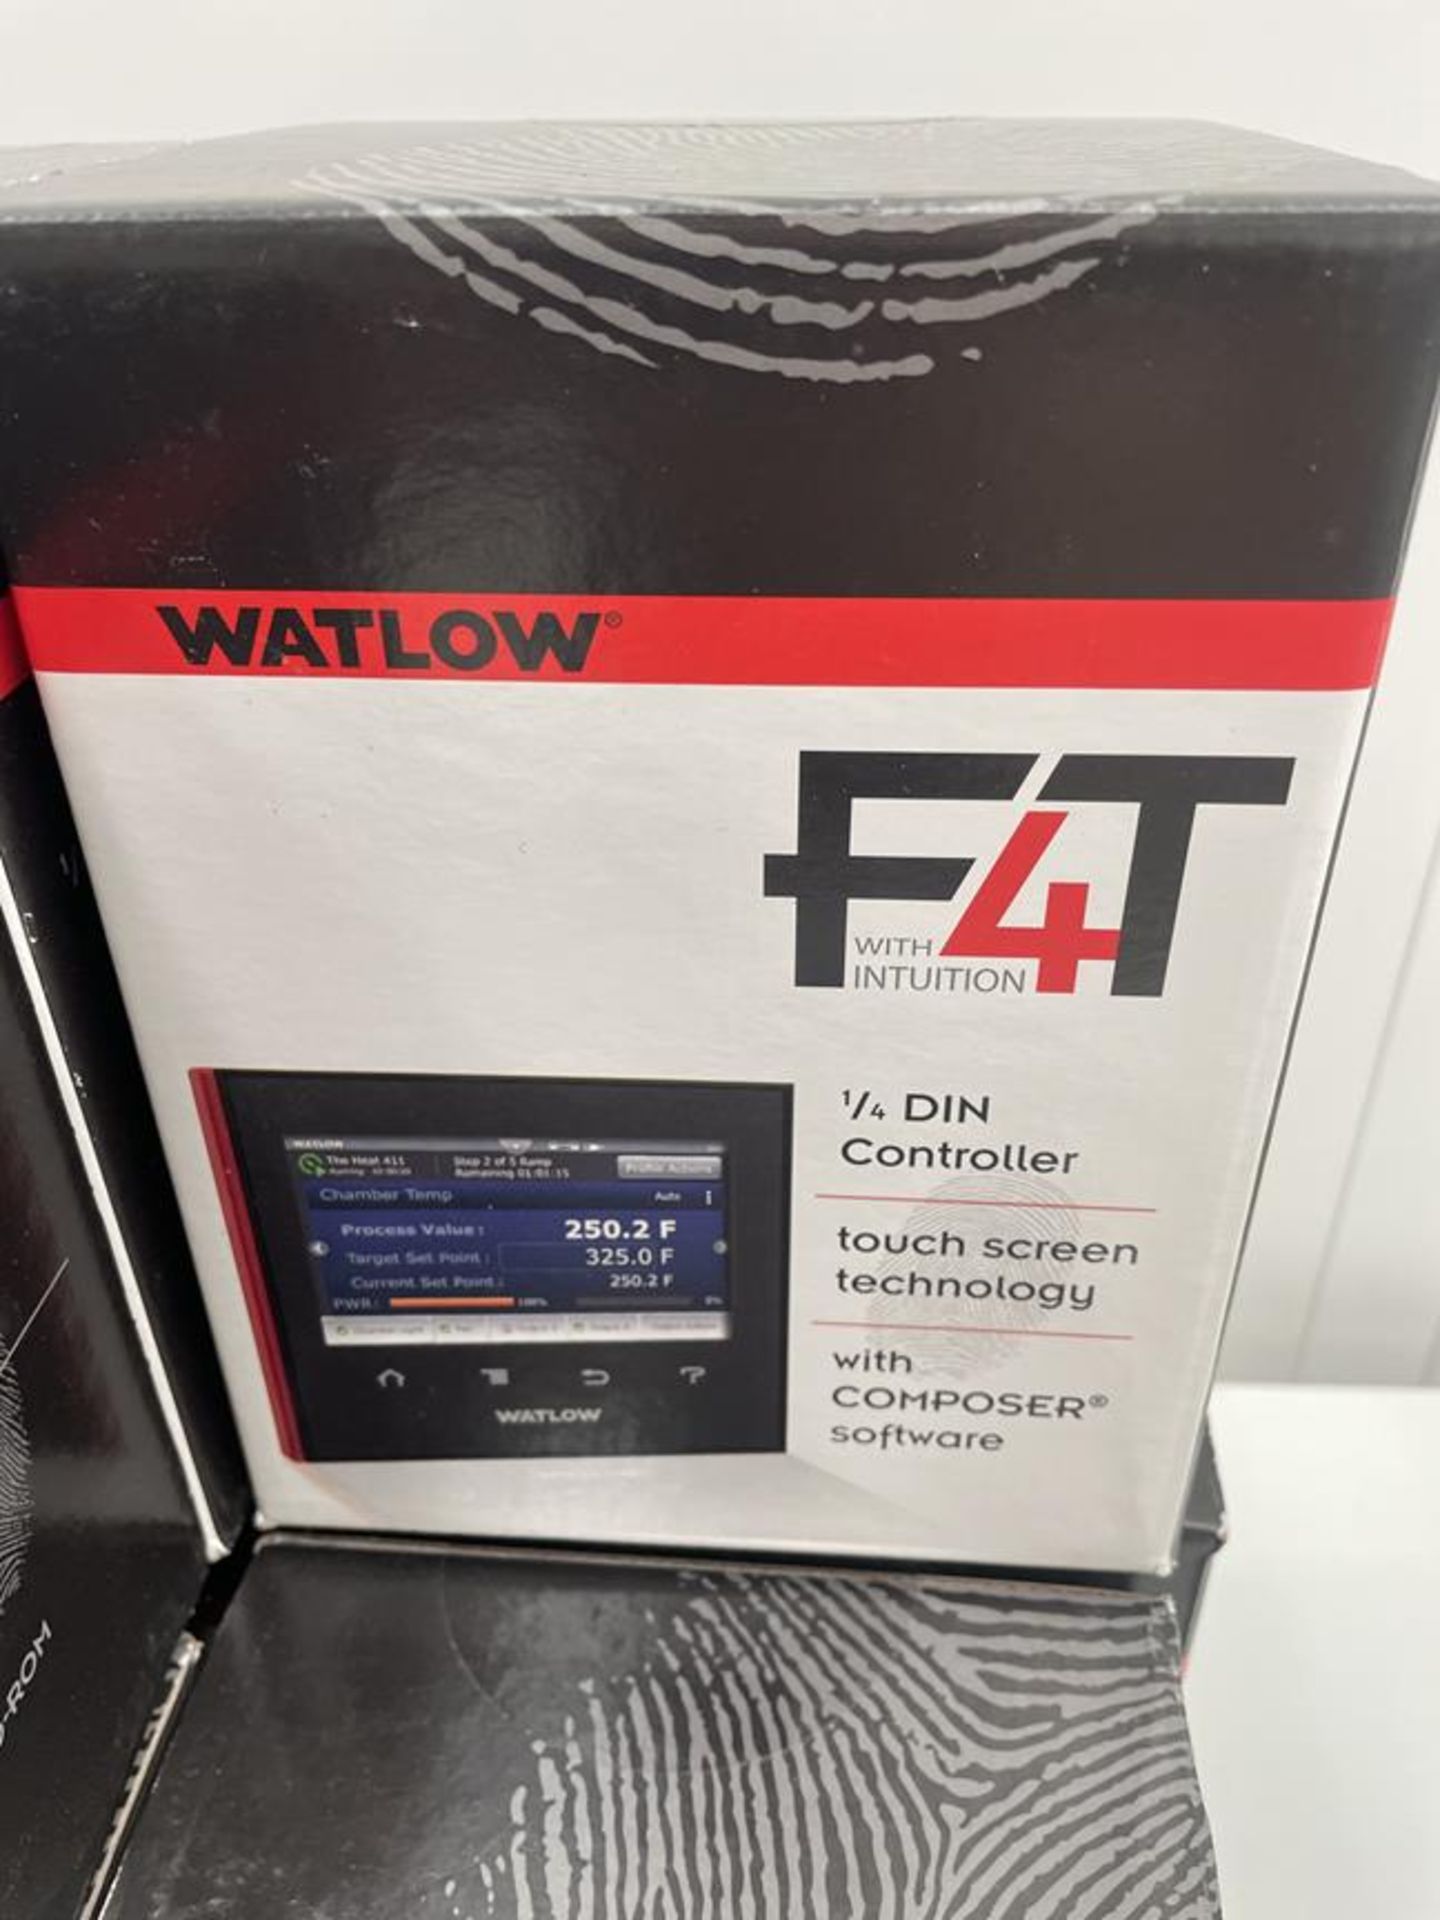 11x (no.) Watlow F4T 1/4 touch screen DIN controllers - Image 2 of 2